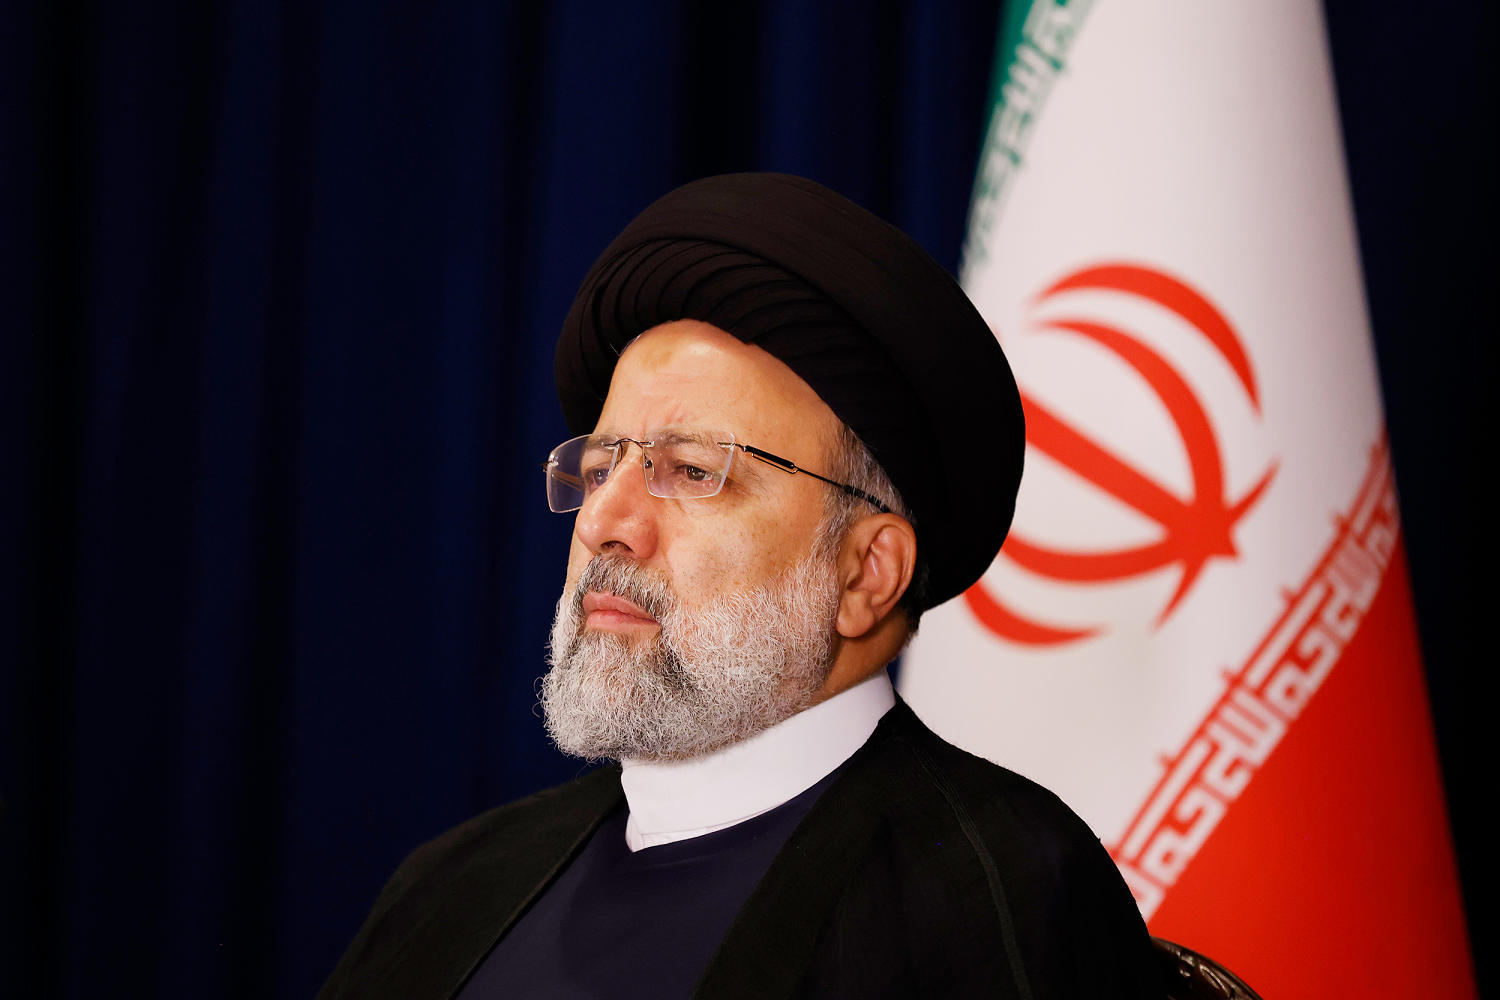 Helicopter carrying Iran’s President Raisi suffers ‘crash landing;’ search and rescue underway